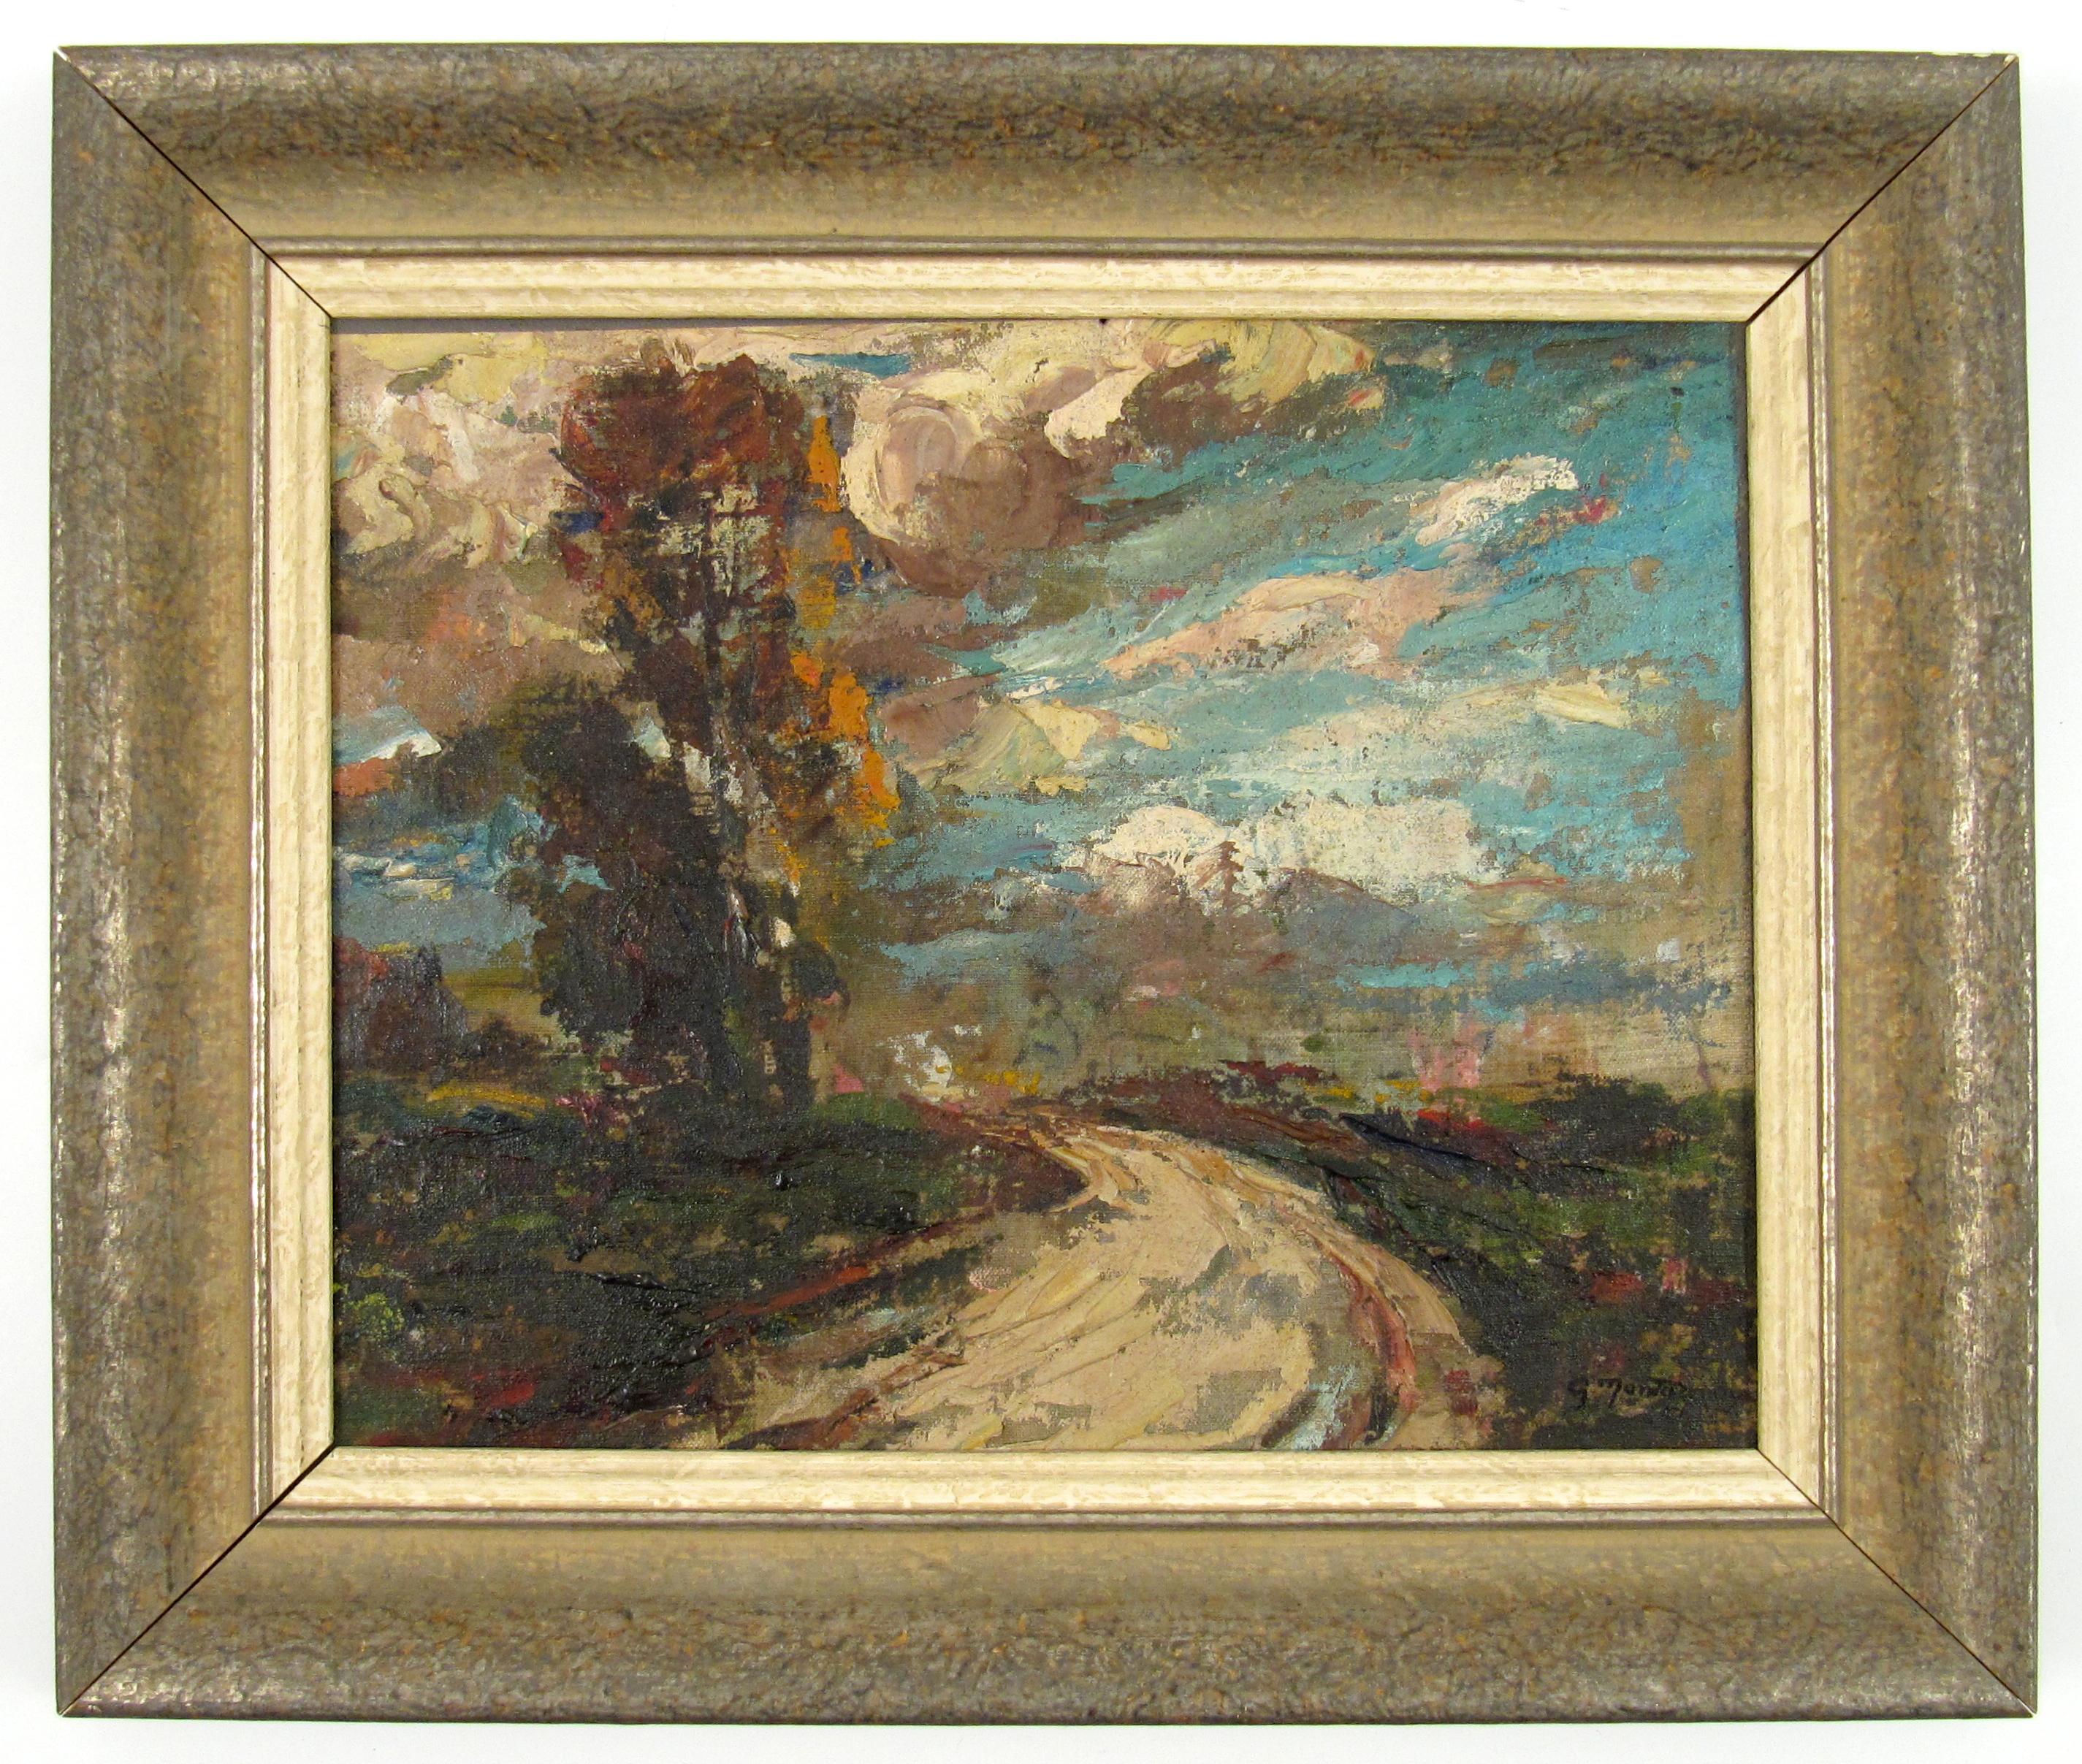 Gaétan Montagney
(French, 20th Century)

Route de campagne bordée d'arbres

•	Oil on canvas on panel ca. 20 x 26 cm
•	Frame ca. 28 x 33 cm
•	Signed lower right

Delightful little landscape painting held in an impressionist style. The artist has used